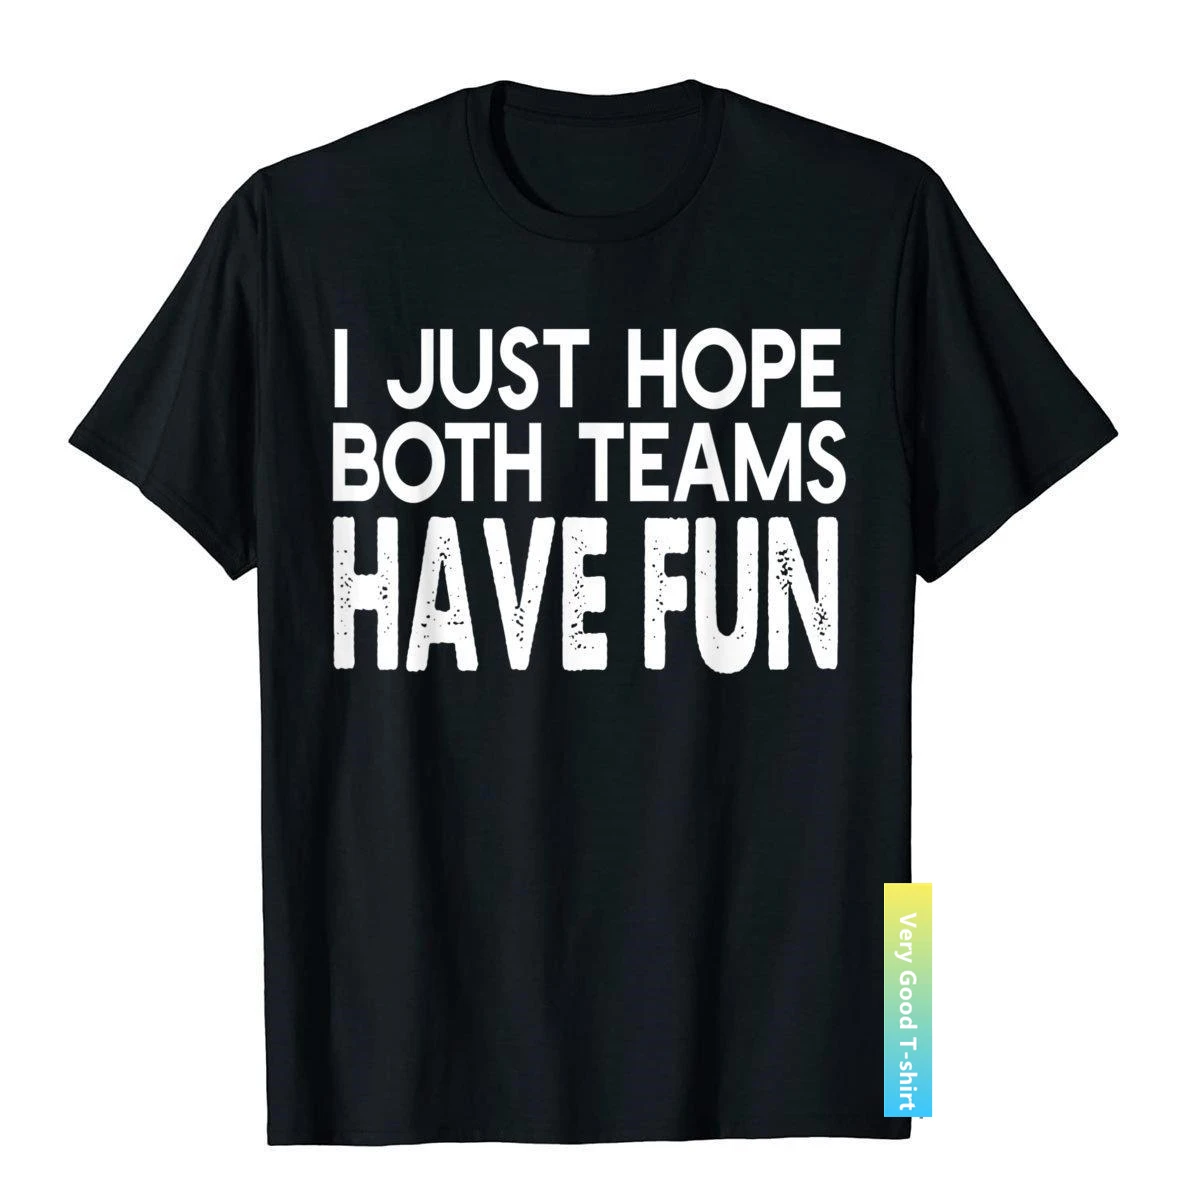 

I Just Hope Both Teams Have Fun Design Funny Sports Gift T-Shirt Cotton Printed Tees On Sale Mens Top T-Shirts Cool